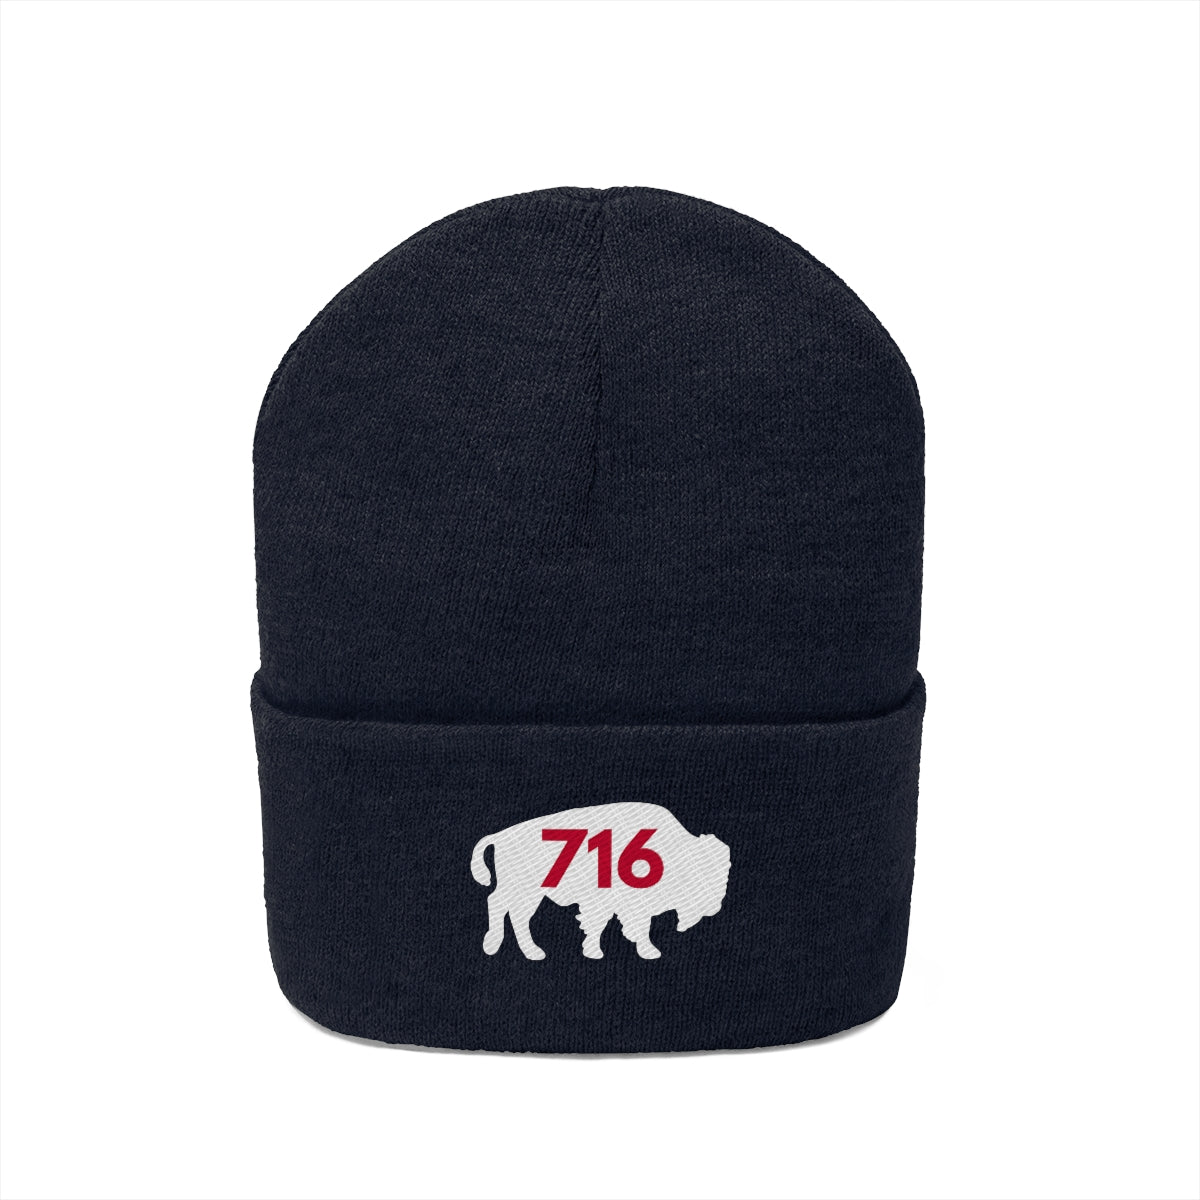 Buffalo 716 Knit Beanie  Winter Hat – Hot with Blue Cheese